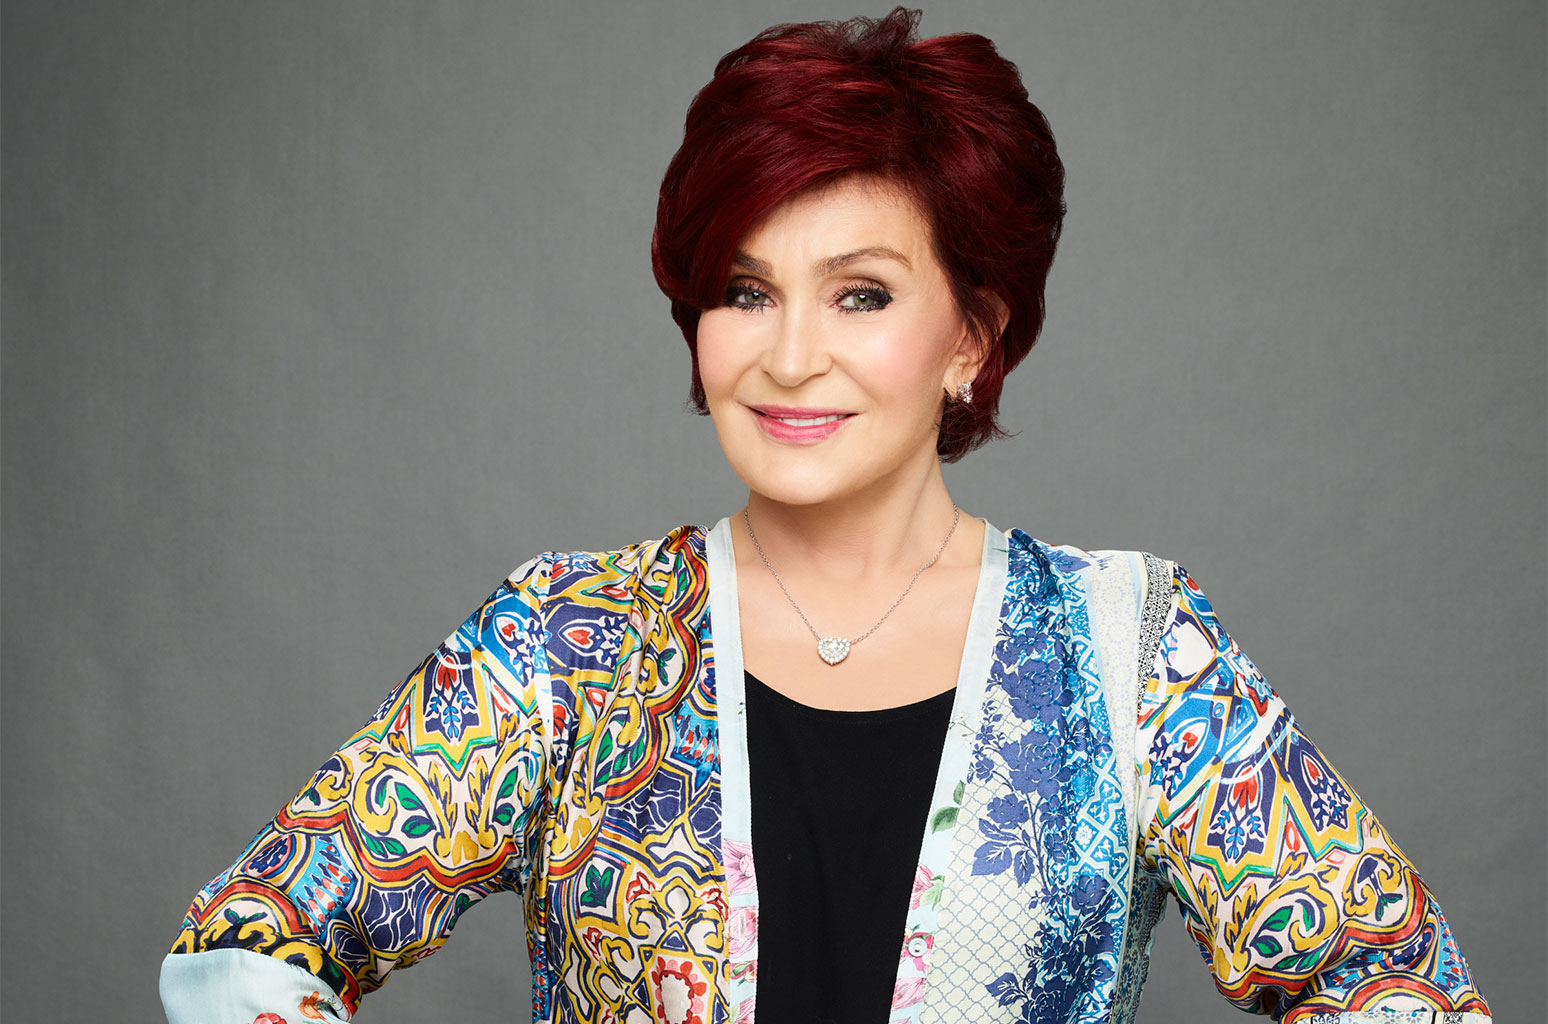 Sharon Osbourne Recalls Sending Ozzy's Assistant Into a Burning House... And Then Firing Him - www.billboard.com